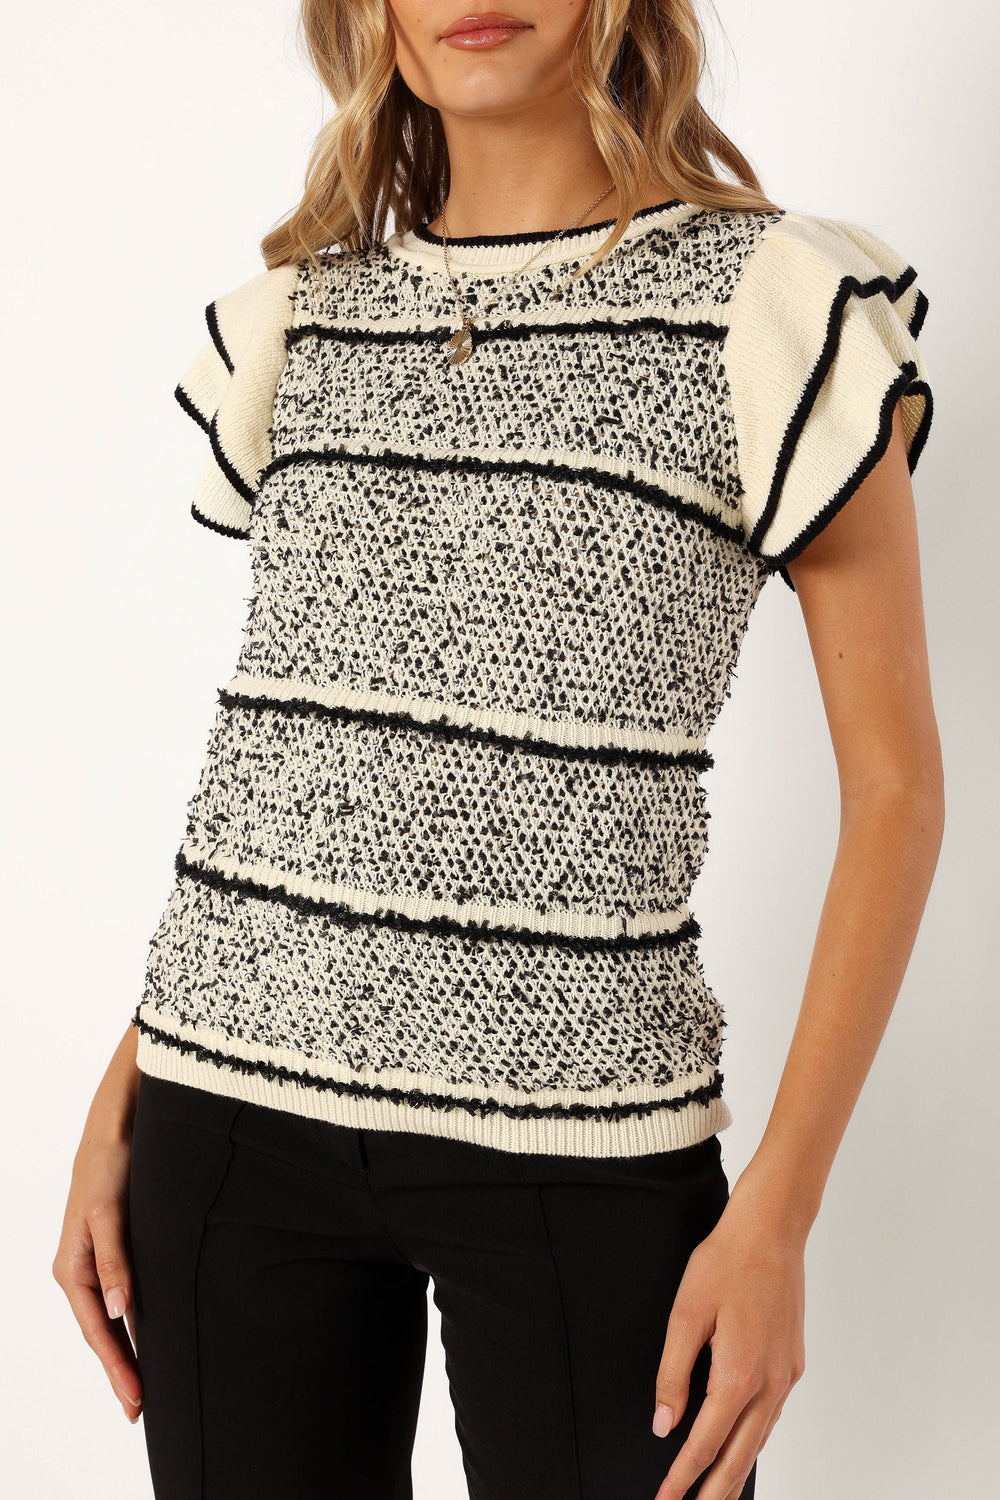 Petal and Pup USA TOPS Lydia Knit Top - Ivory Black